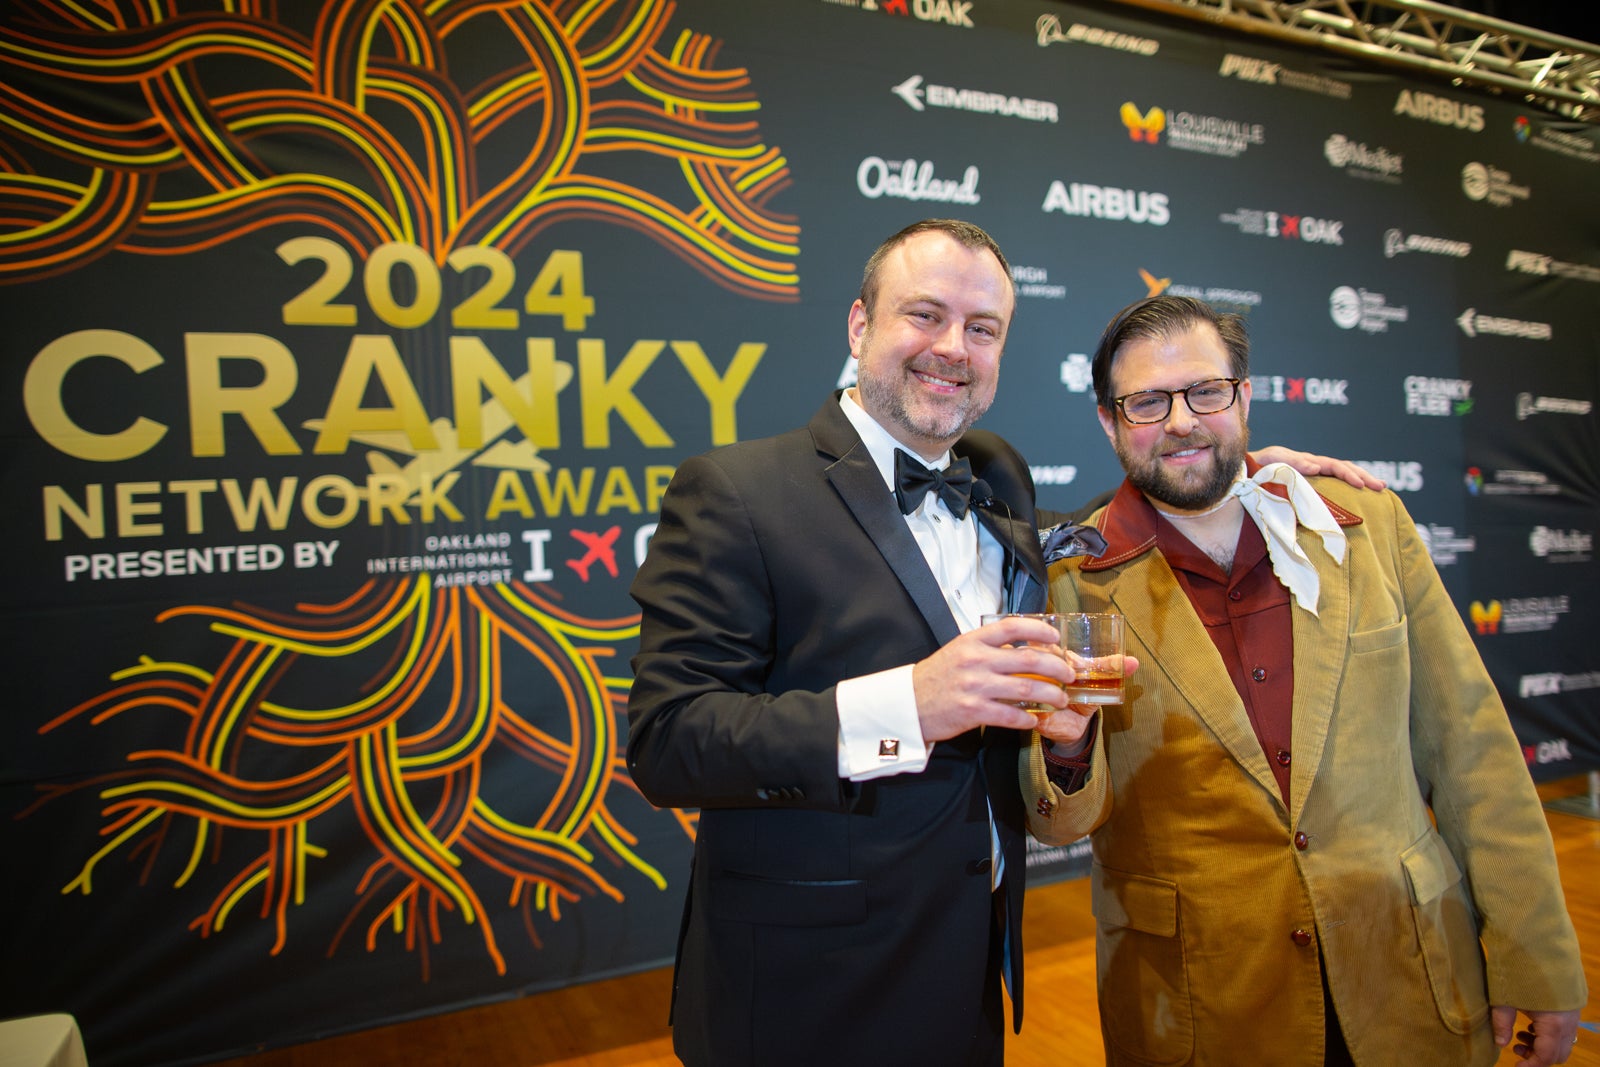 Cranky Flier author Brett Snyder (right) and Courtney Miller of Visual Approach Analytics raise a glass to the 2024 Cranky Network Awards in Oakland. 